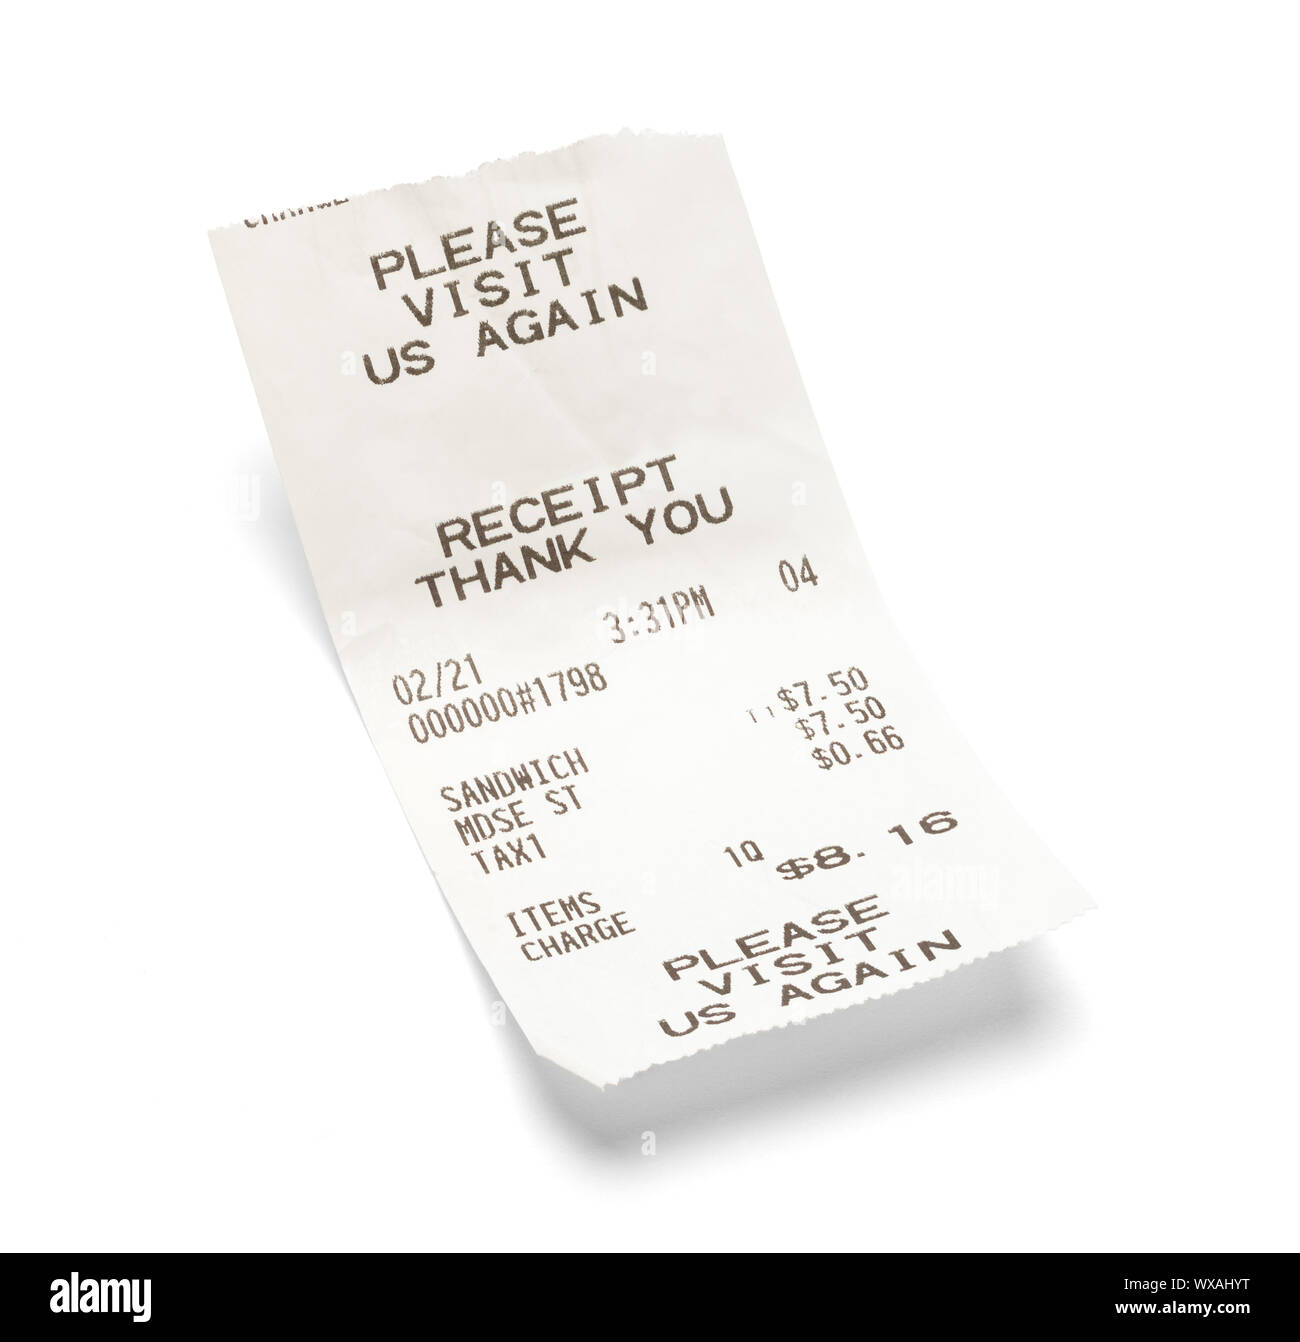 Fast Food Sandwich Receipt Isolated on White. Stock Photo